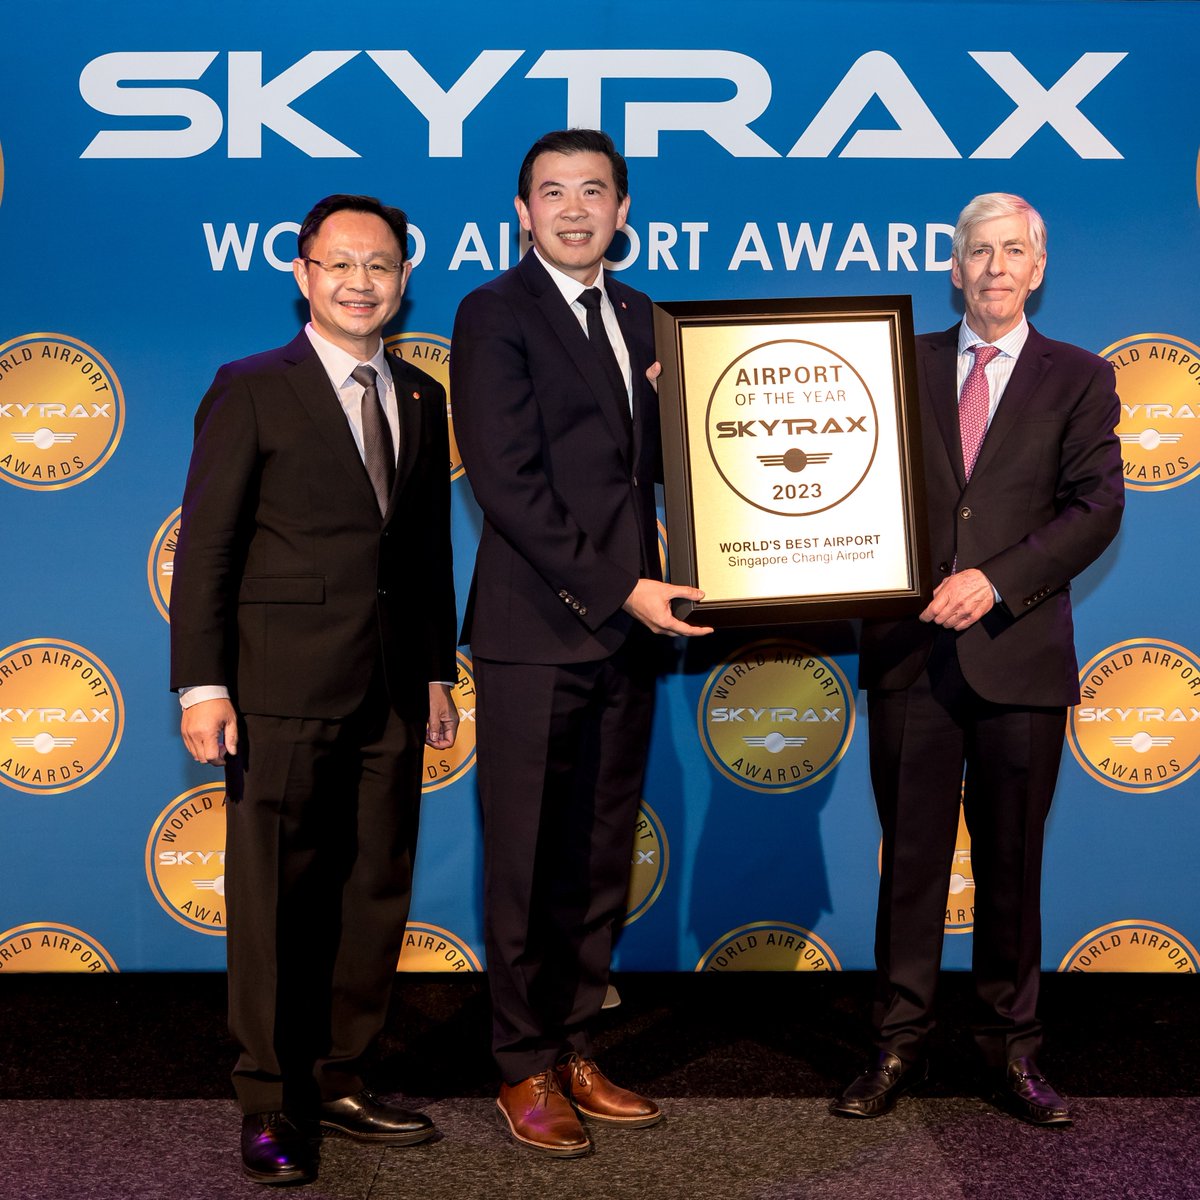 We are honoured to receive our 12th World’s Best Airport Award by Skytrax! 🥳

We couldn’t have done it without your support and the dedication of our airport community. Thank you and we look forward to welcoming you to Changi Airport! ✨

Find out more: https://t.co/rptQFYMPfC https://t.co/6YbL4nqXNi